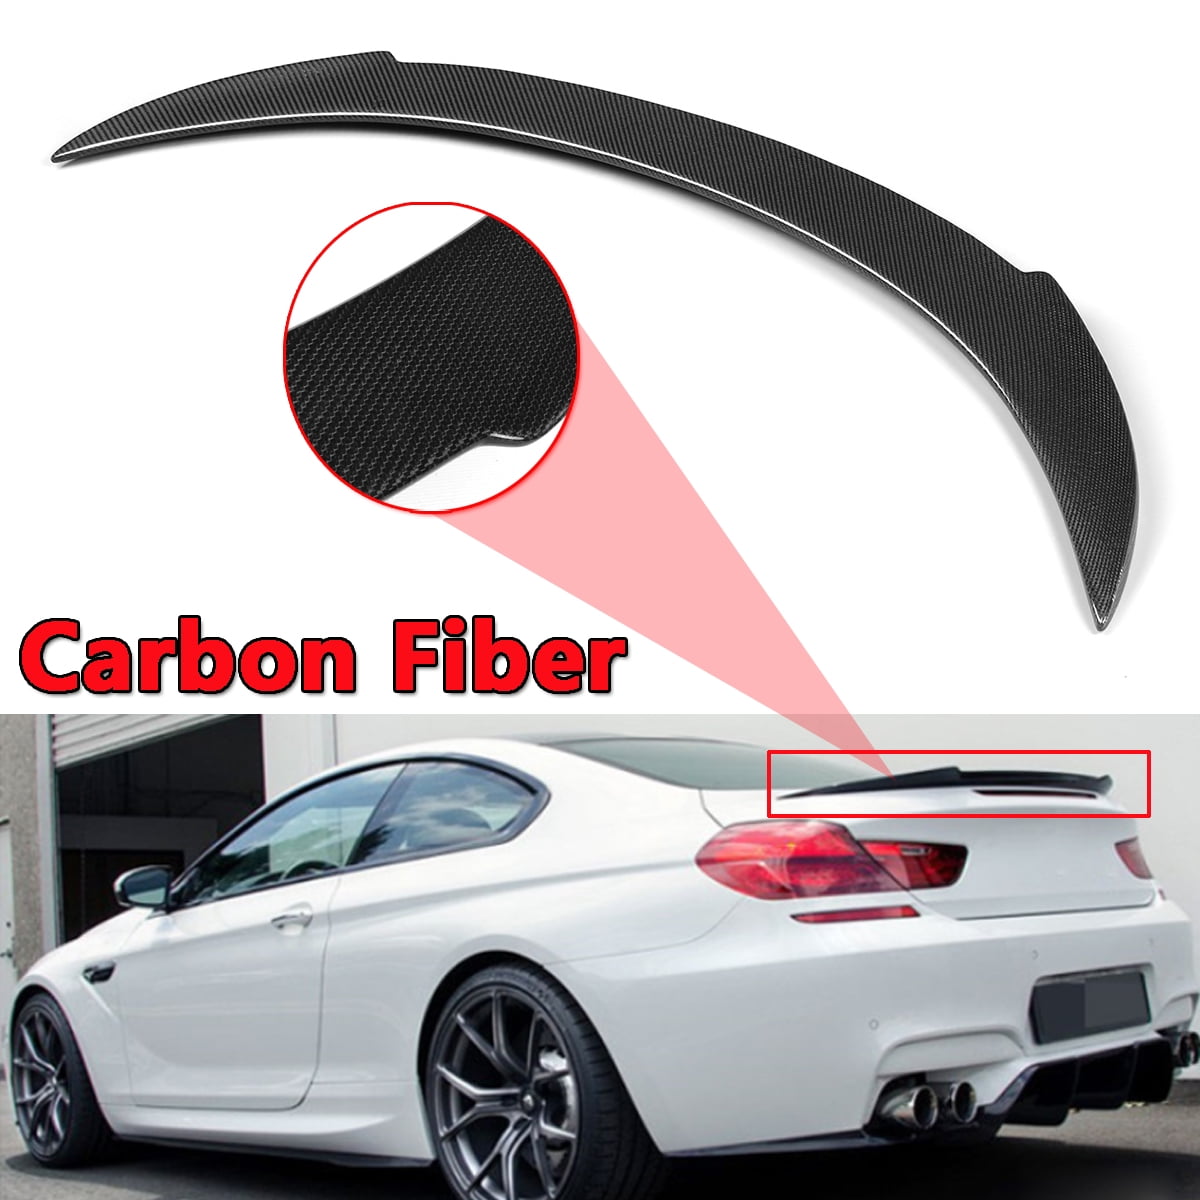 Carbon Fiber GTX Trunk Wing Spoiler Lip For BMW F13 640i 650i M6 Coupe 2012+